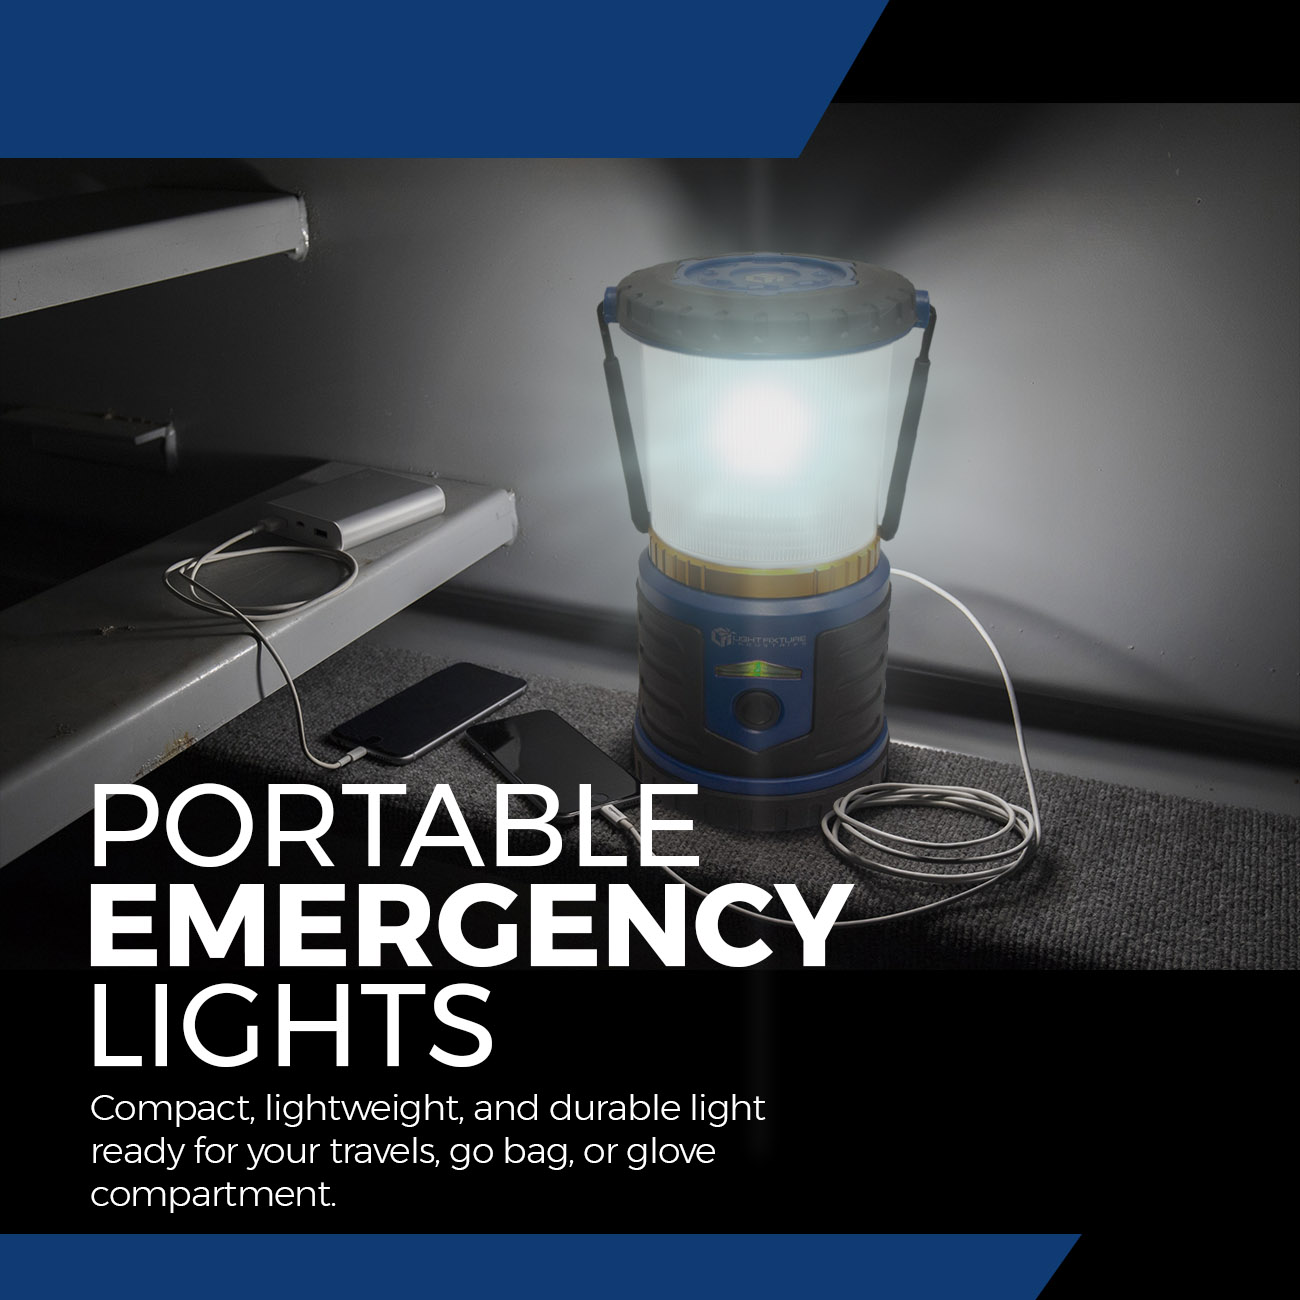 Keep your home lit up during a power outage with emergency lights